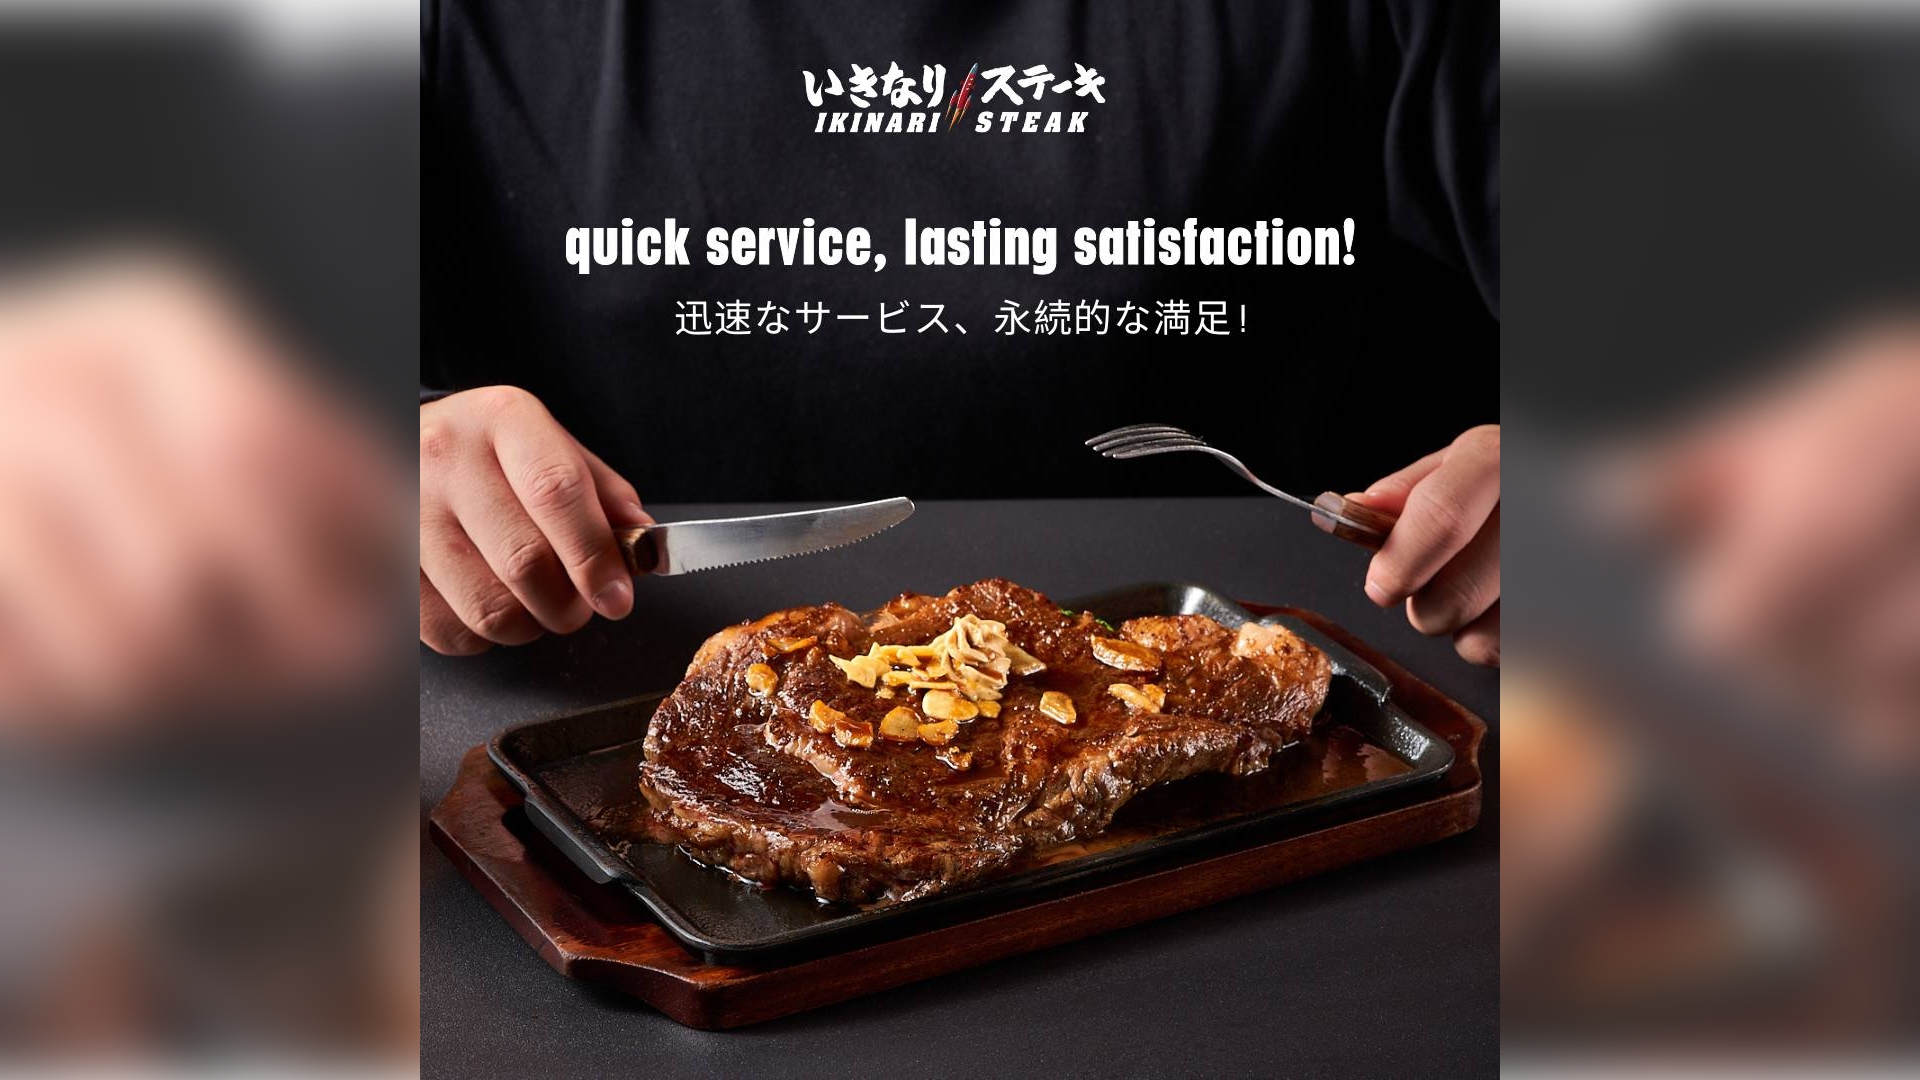 Ikinari Steak x JCB Promo: Exclusive Buy One, Get One Deals for Platinum and Gold Cardholders